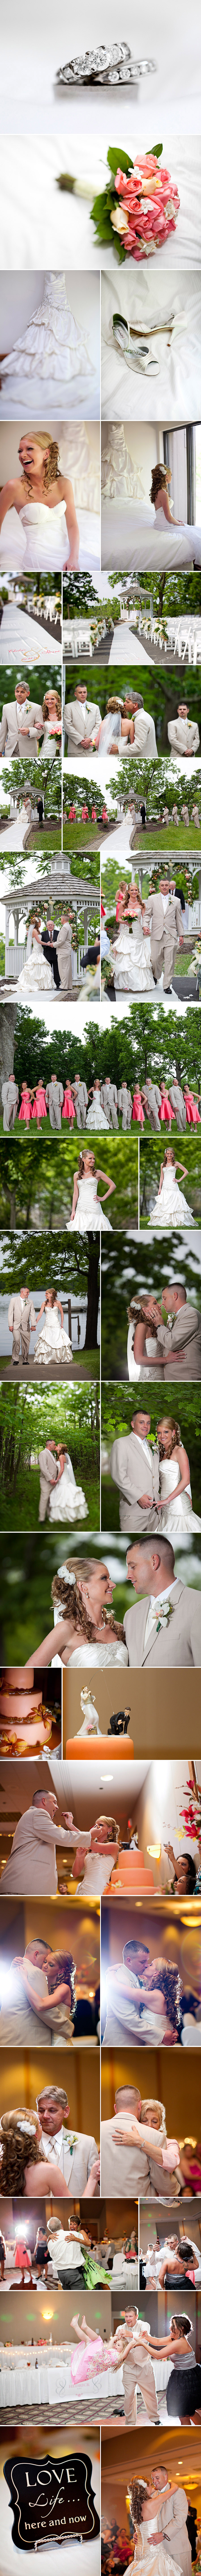 Deer Creek State Park Lodge and Conference Center Weddings